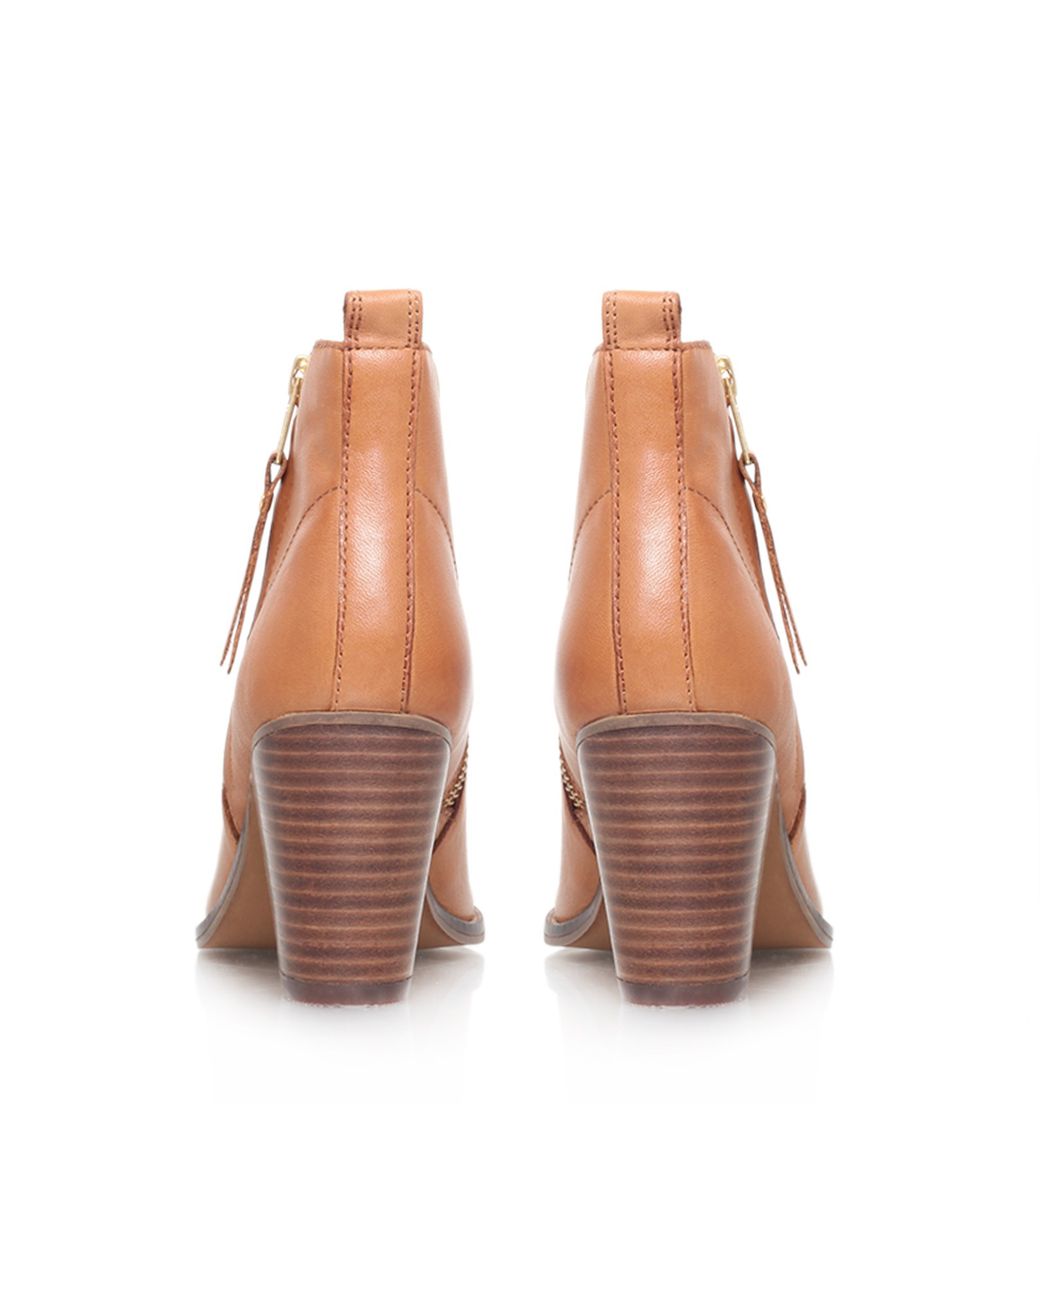 Carvela Kurt Geiger Tanga Block Heeled Ankle Boots in Brown | Lyst Canada